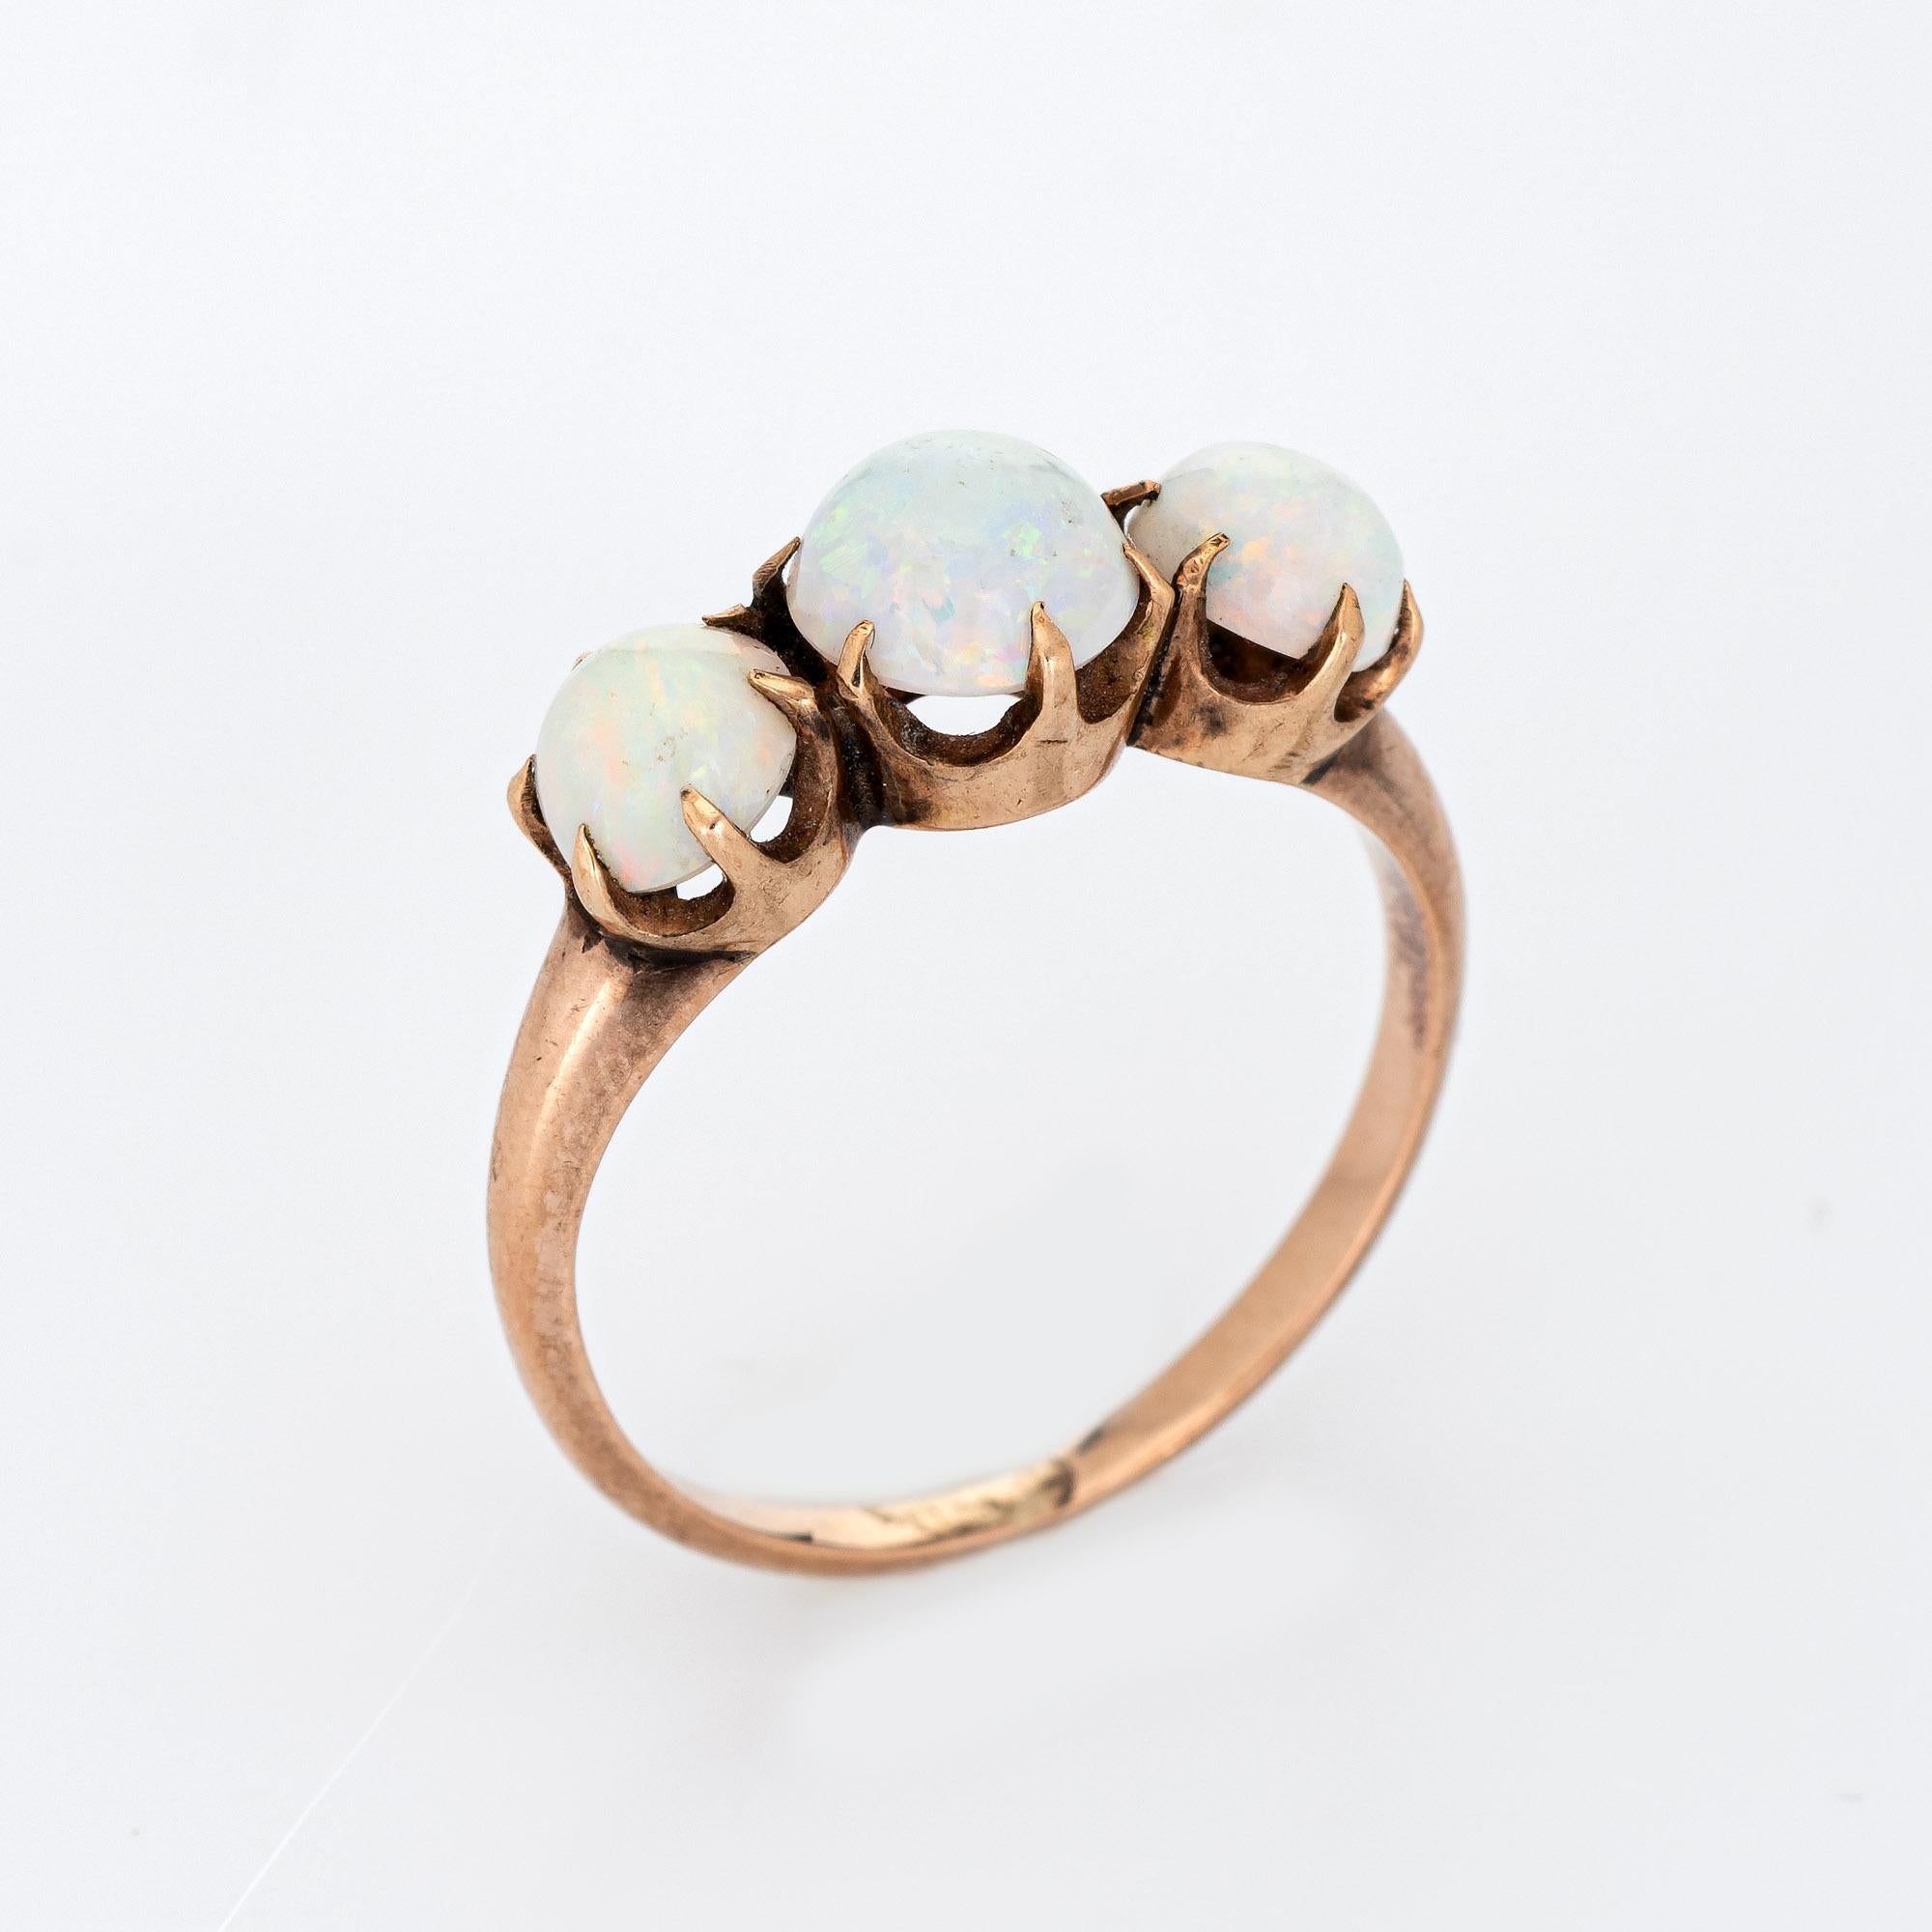 Finely detailed antique Victorian 3 trilogy opal ring (circa 1880s to 1900s) crafted in 10 karat rose gold. 

Cabochon cut natural opals measure 5mm to 6mm and total an estimated 2.20 carats. The opals are in very good condition and free of cracks